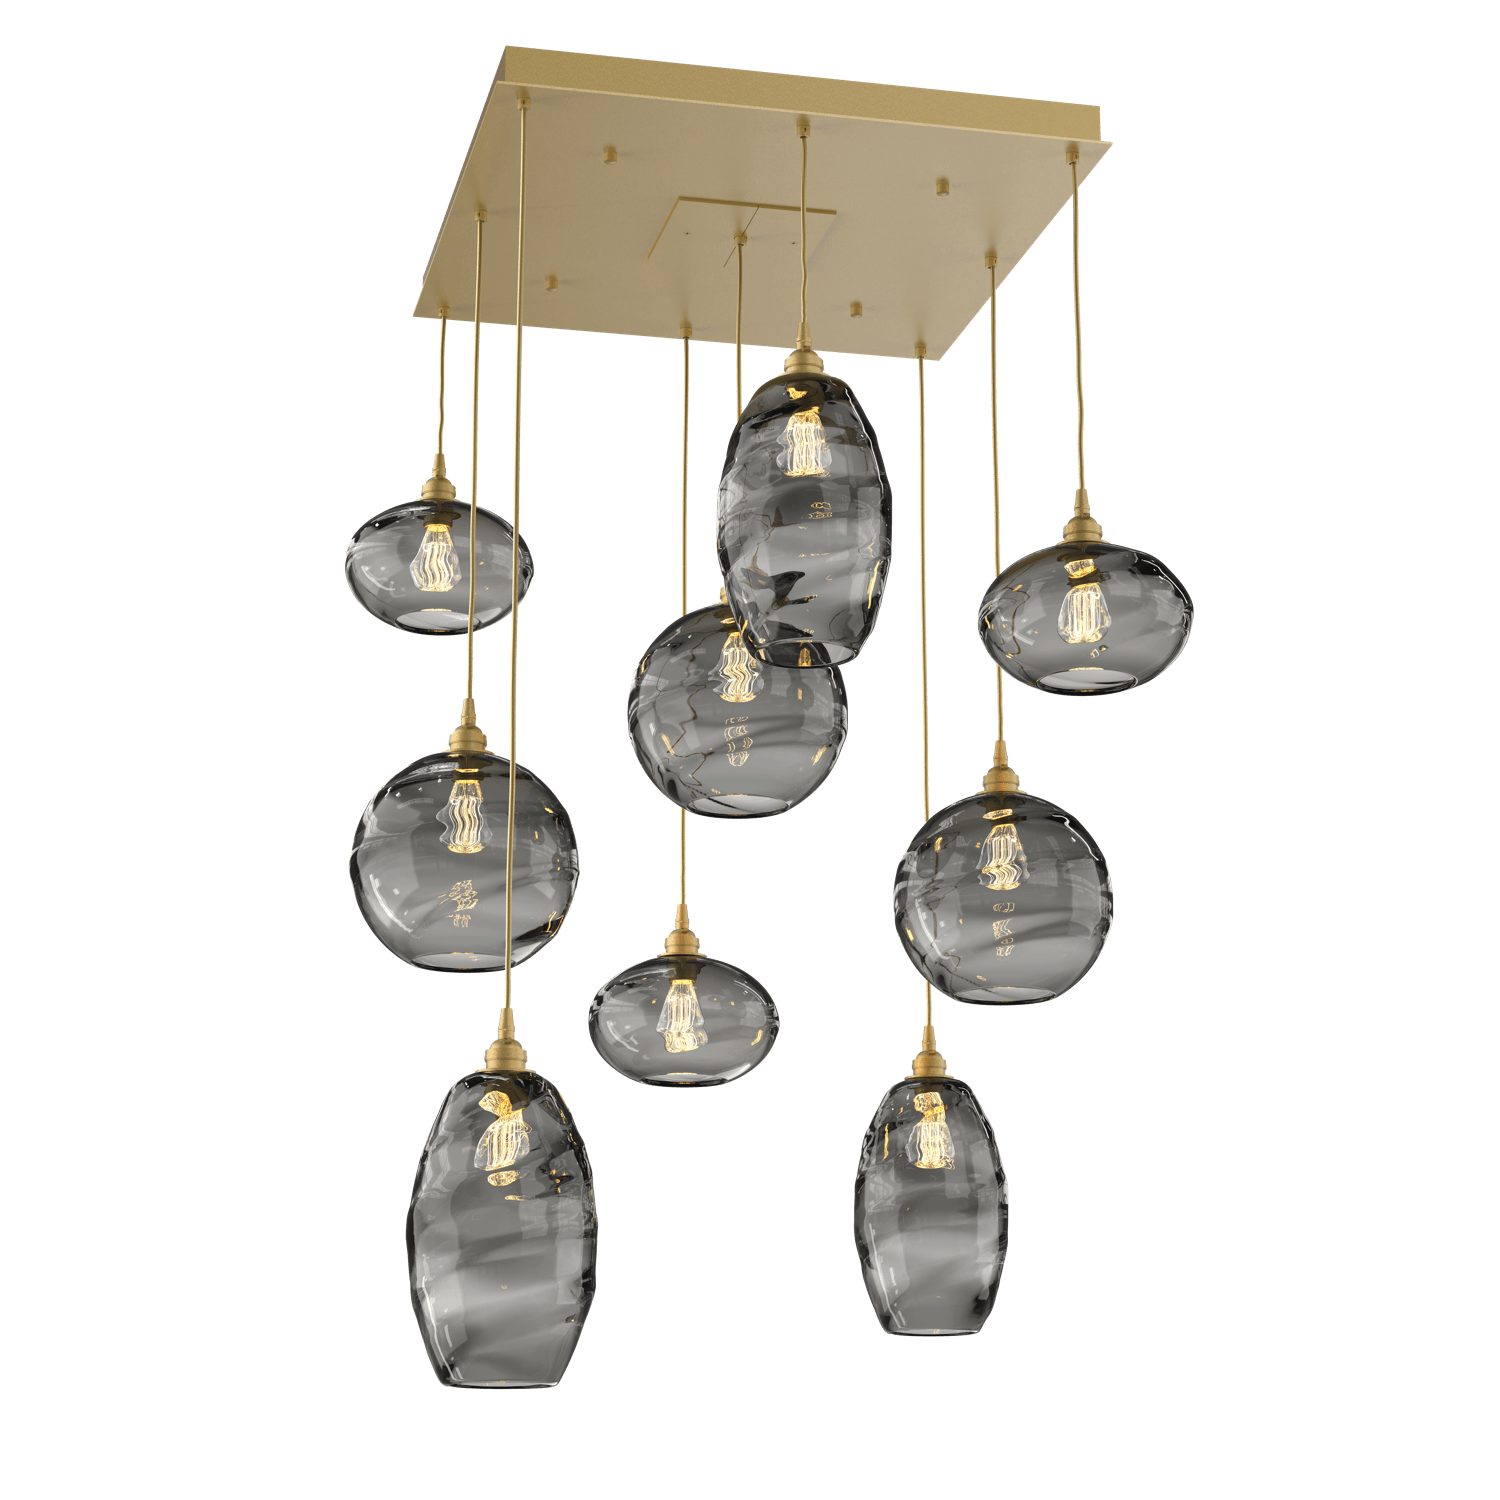 CHB0048-09-GB-OS-Hammerton-Studio-Optic-Blown-Glass-Misto-9-light-square-pendant-chandelier-with-gilded-brass-finish-and-optic-smoke-blown-glass-shades-and-incandescent-lamping